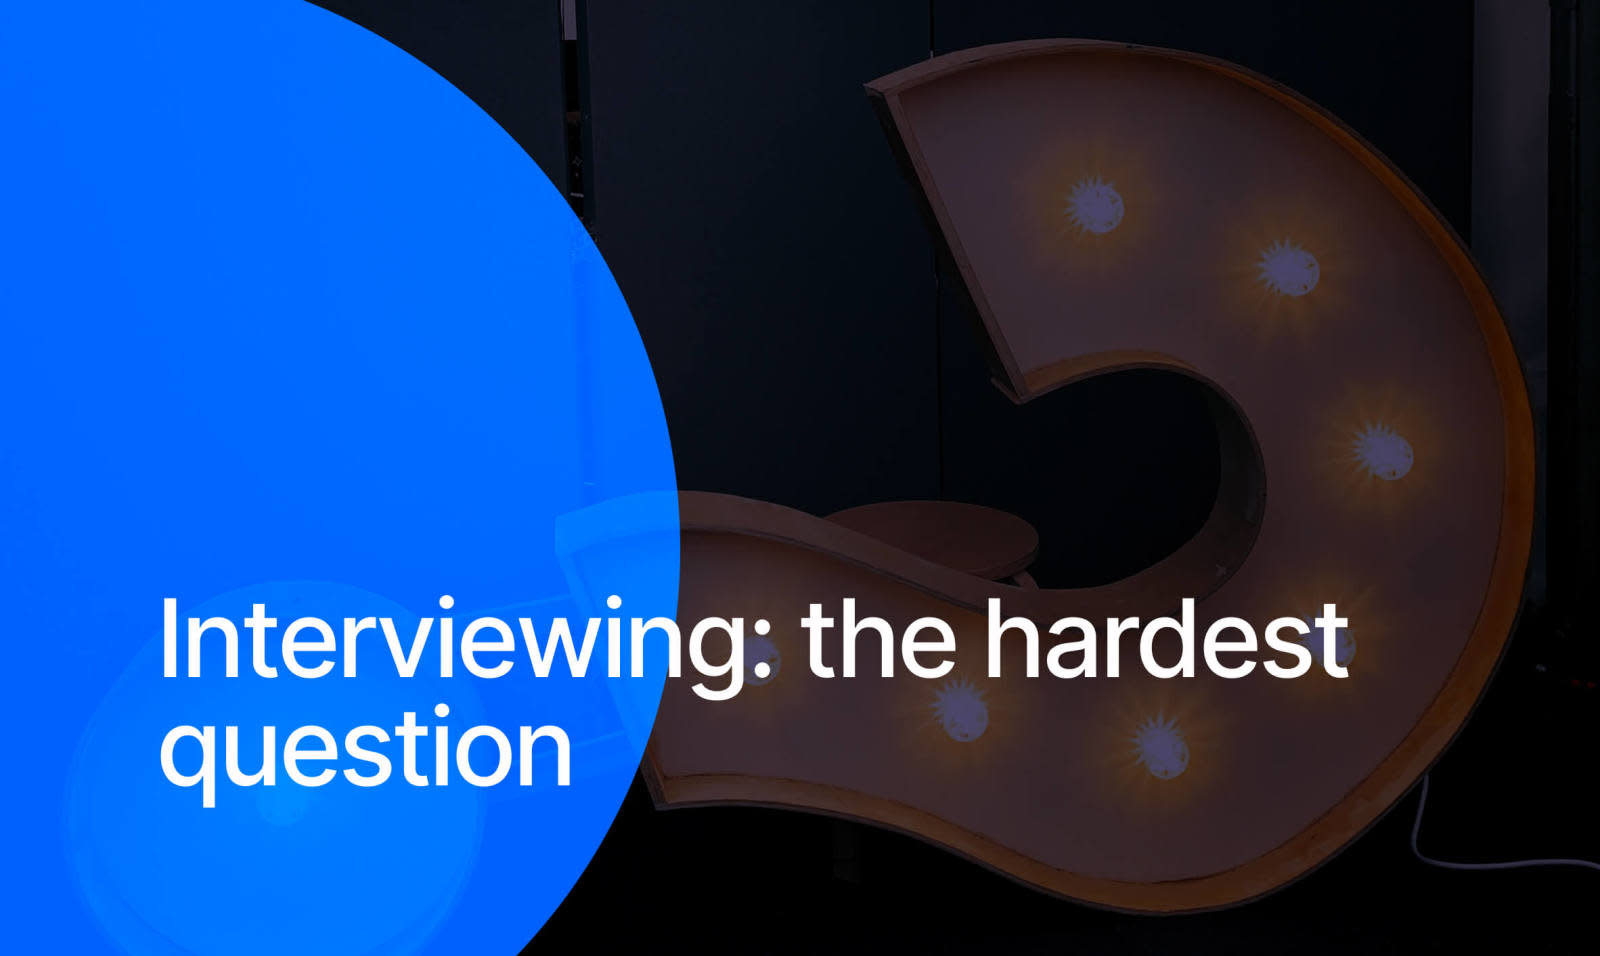 Interviewing the hardest question